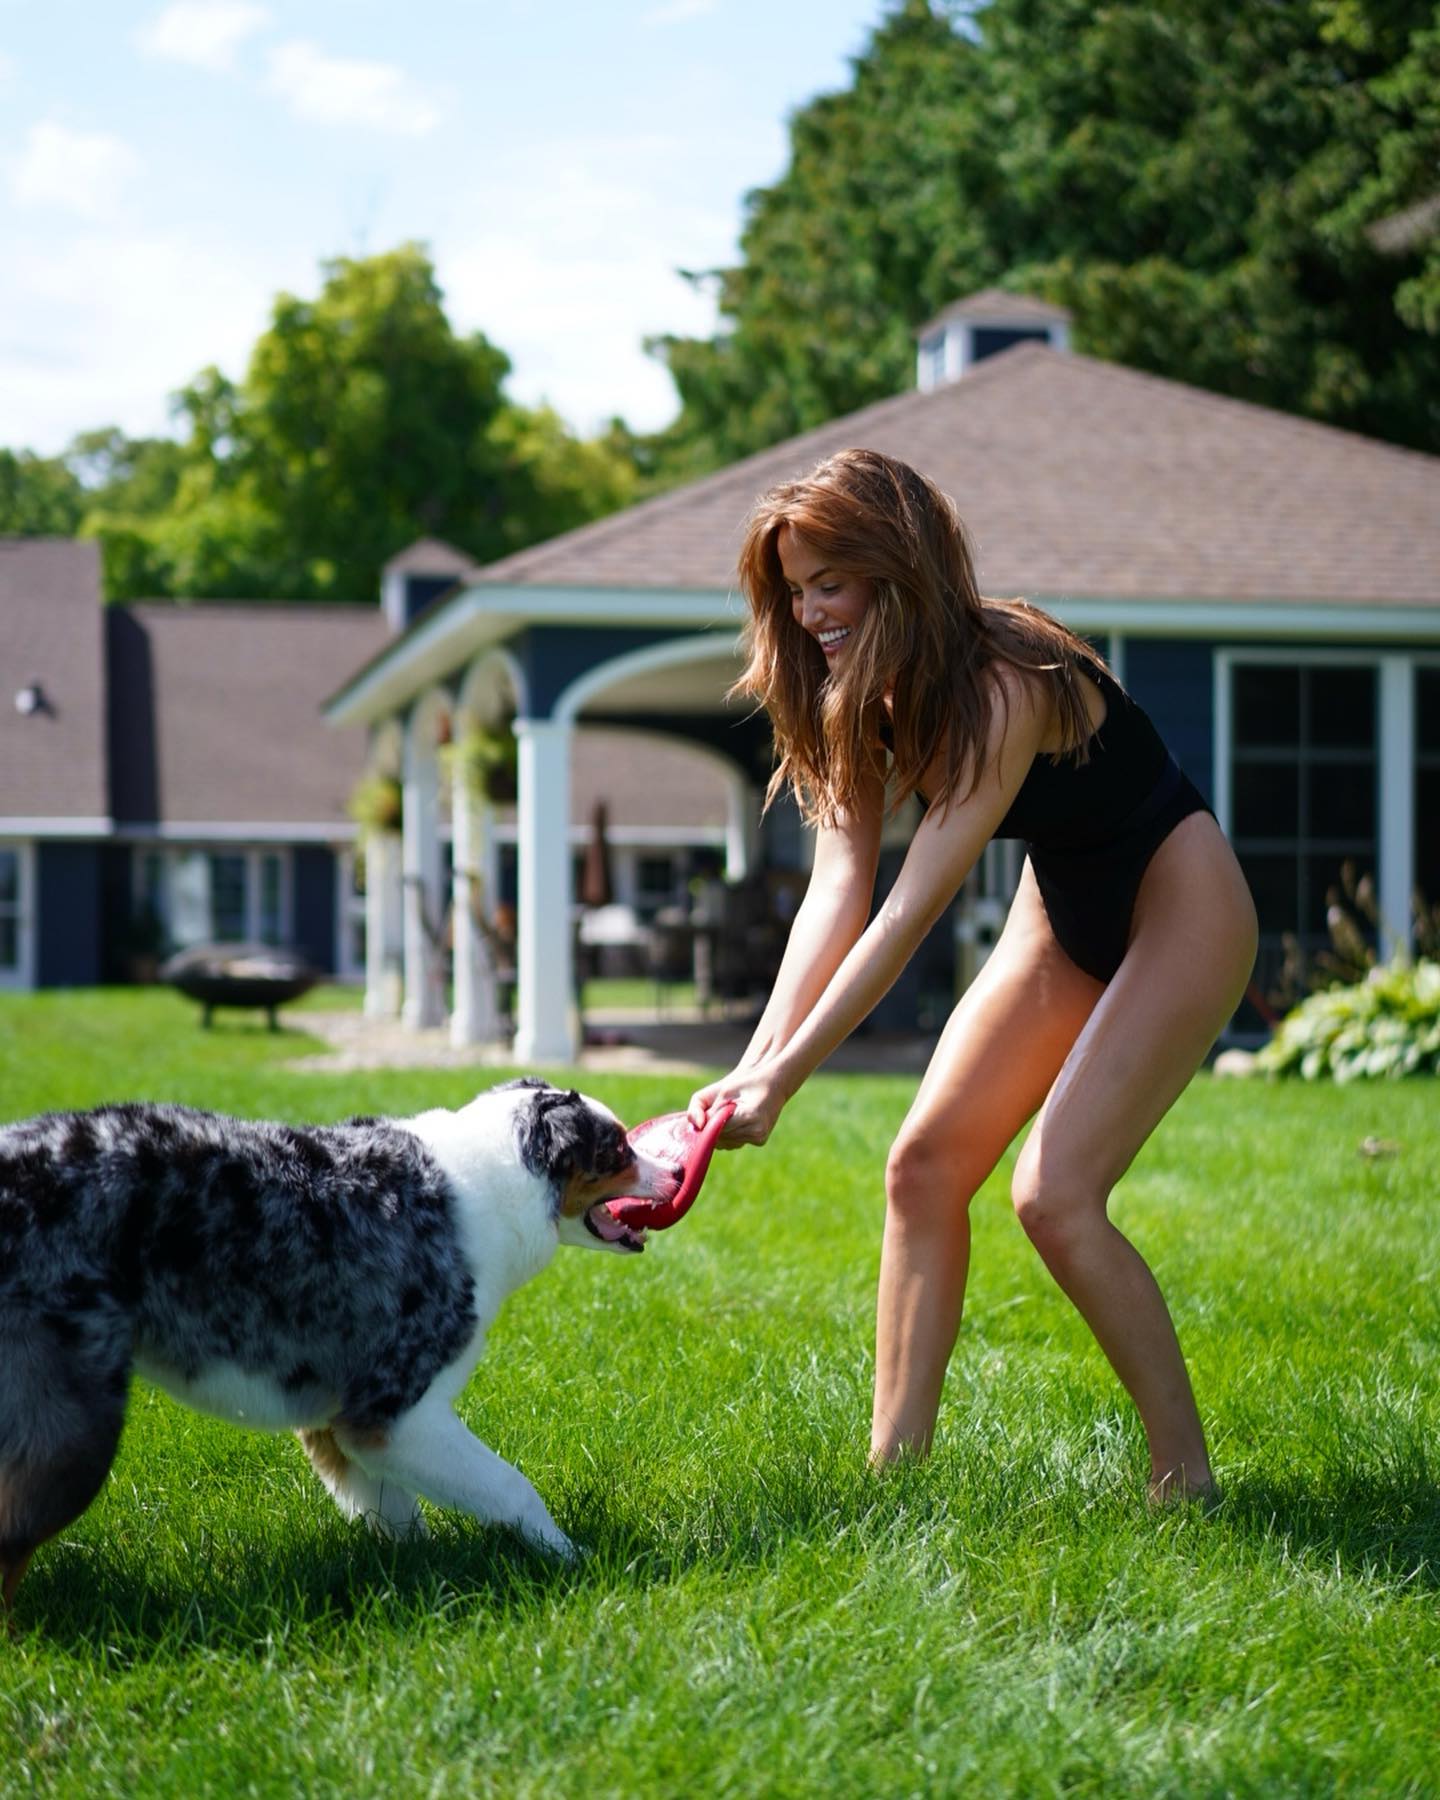 Photos n°5 : Haley Kalil’s Dog Day Afternoon!